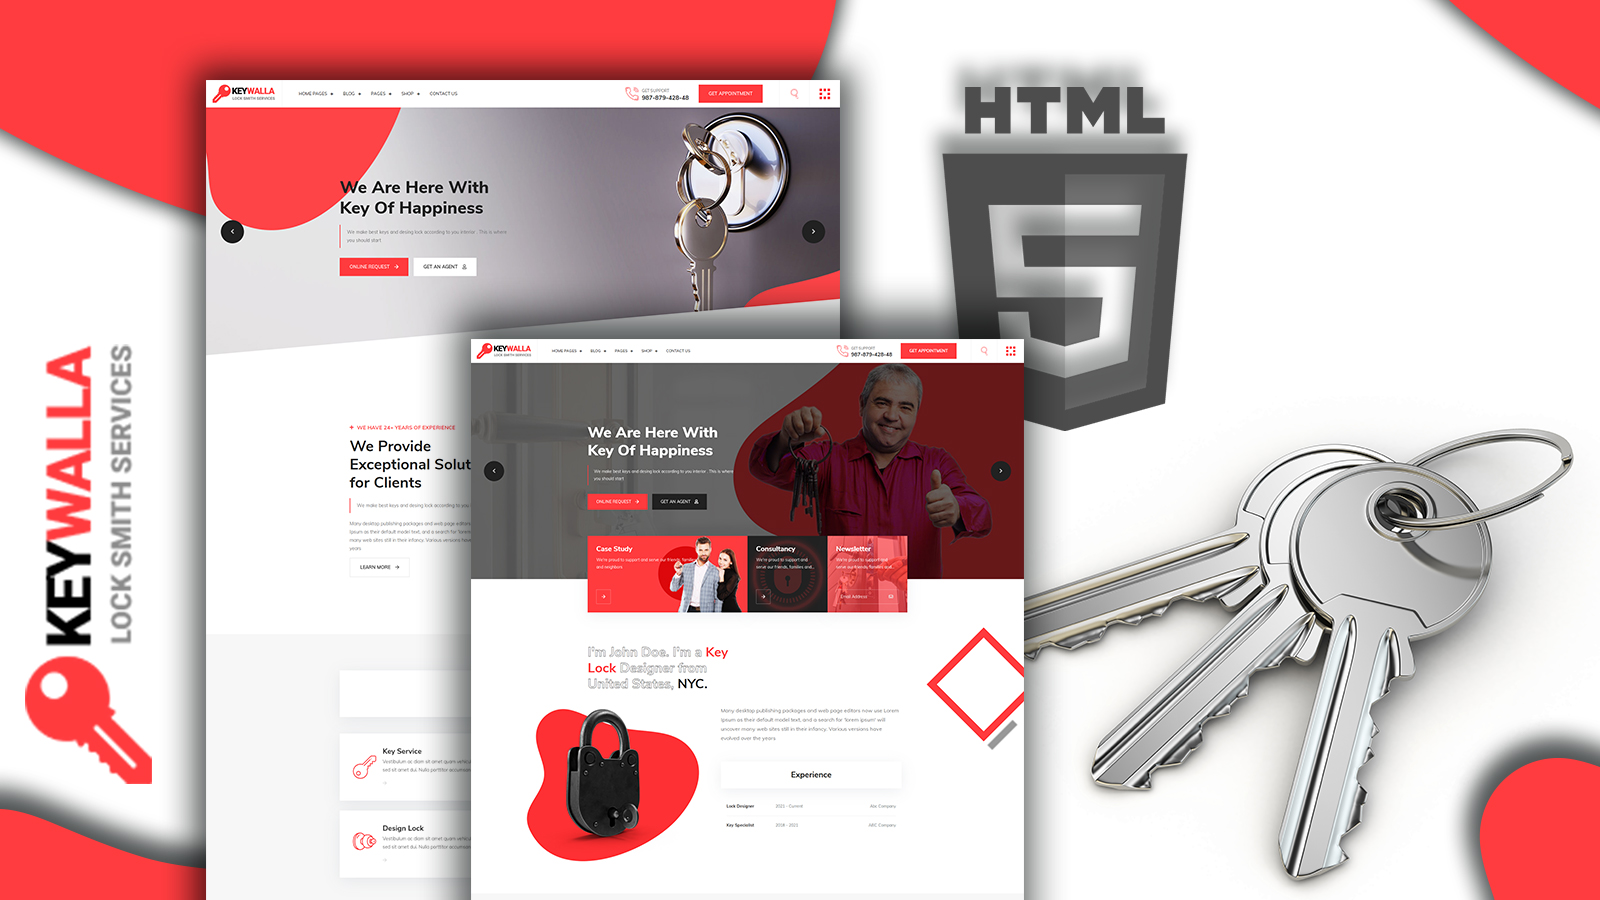 Keywalla- Key Service Website Template - Red and Grey Theme